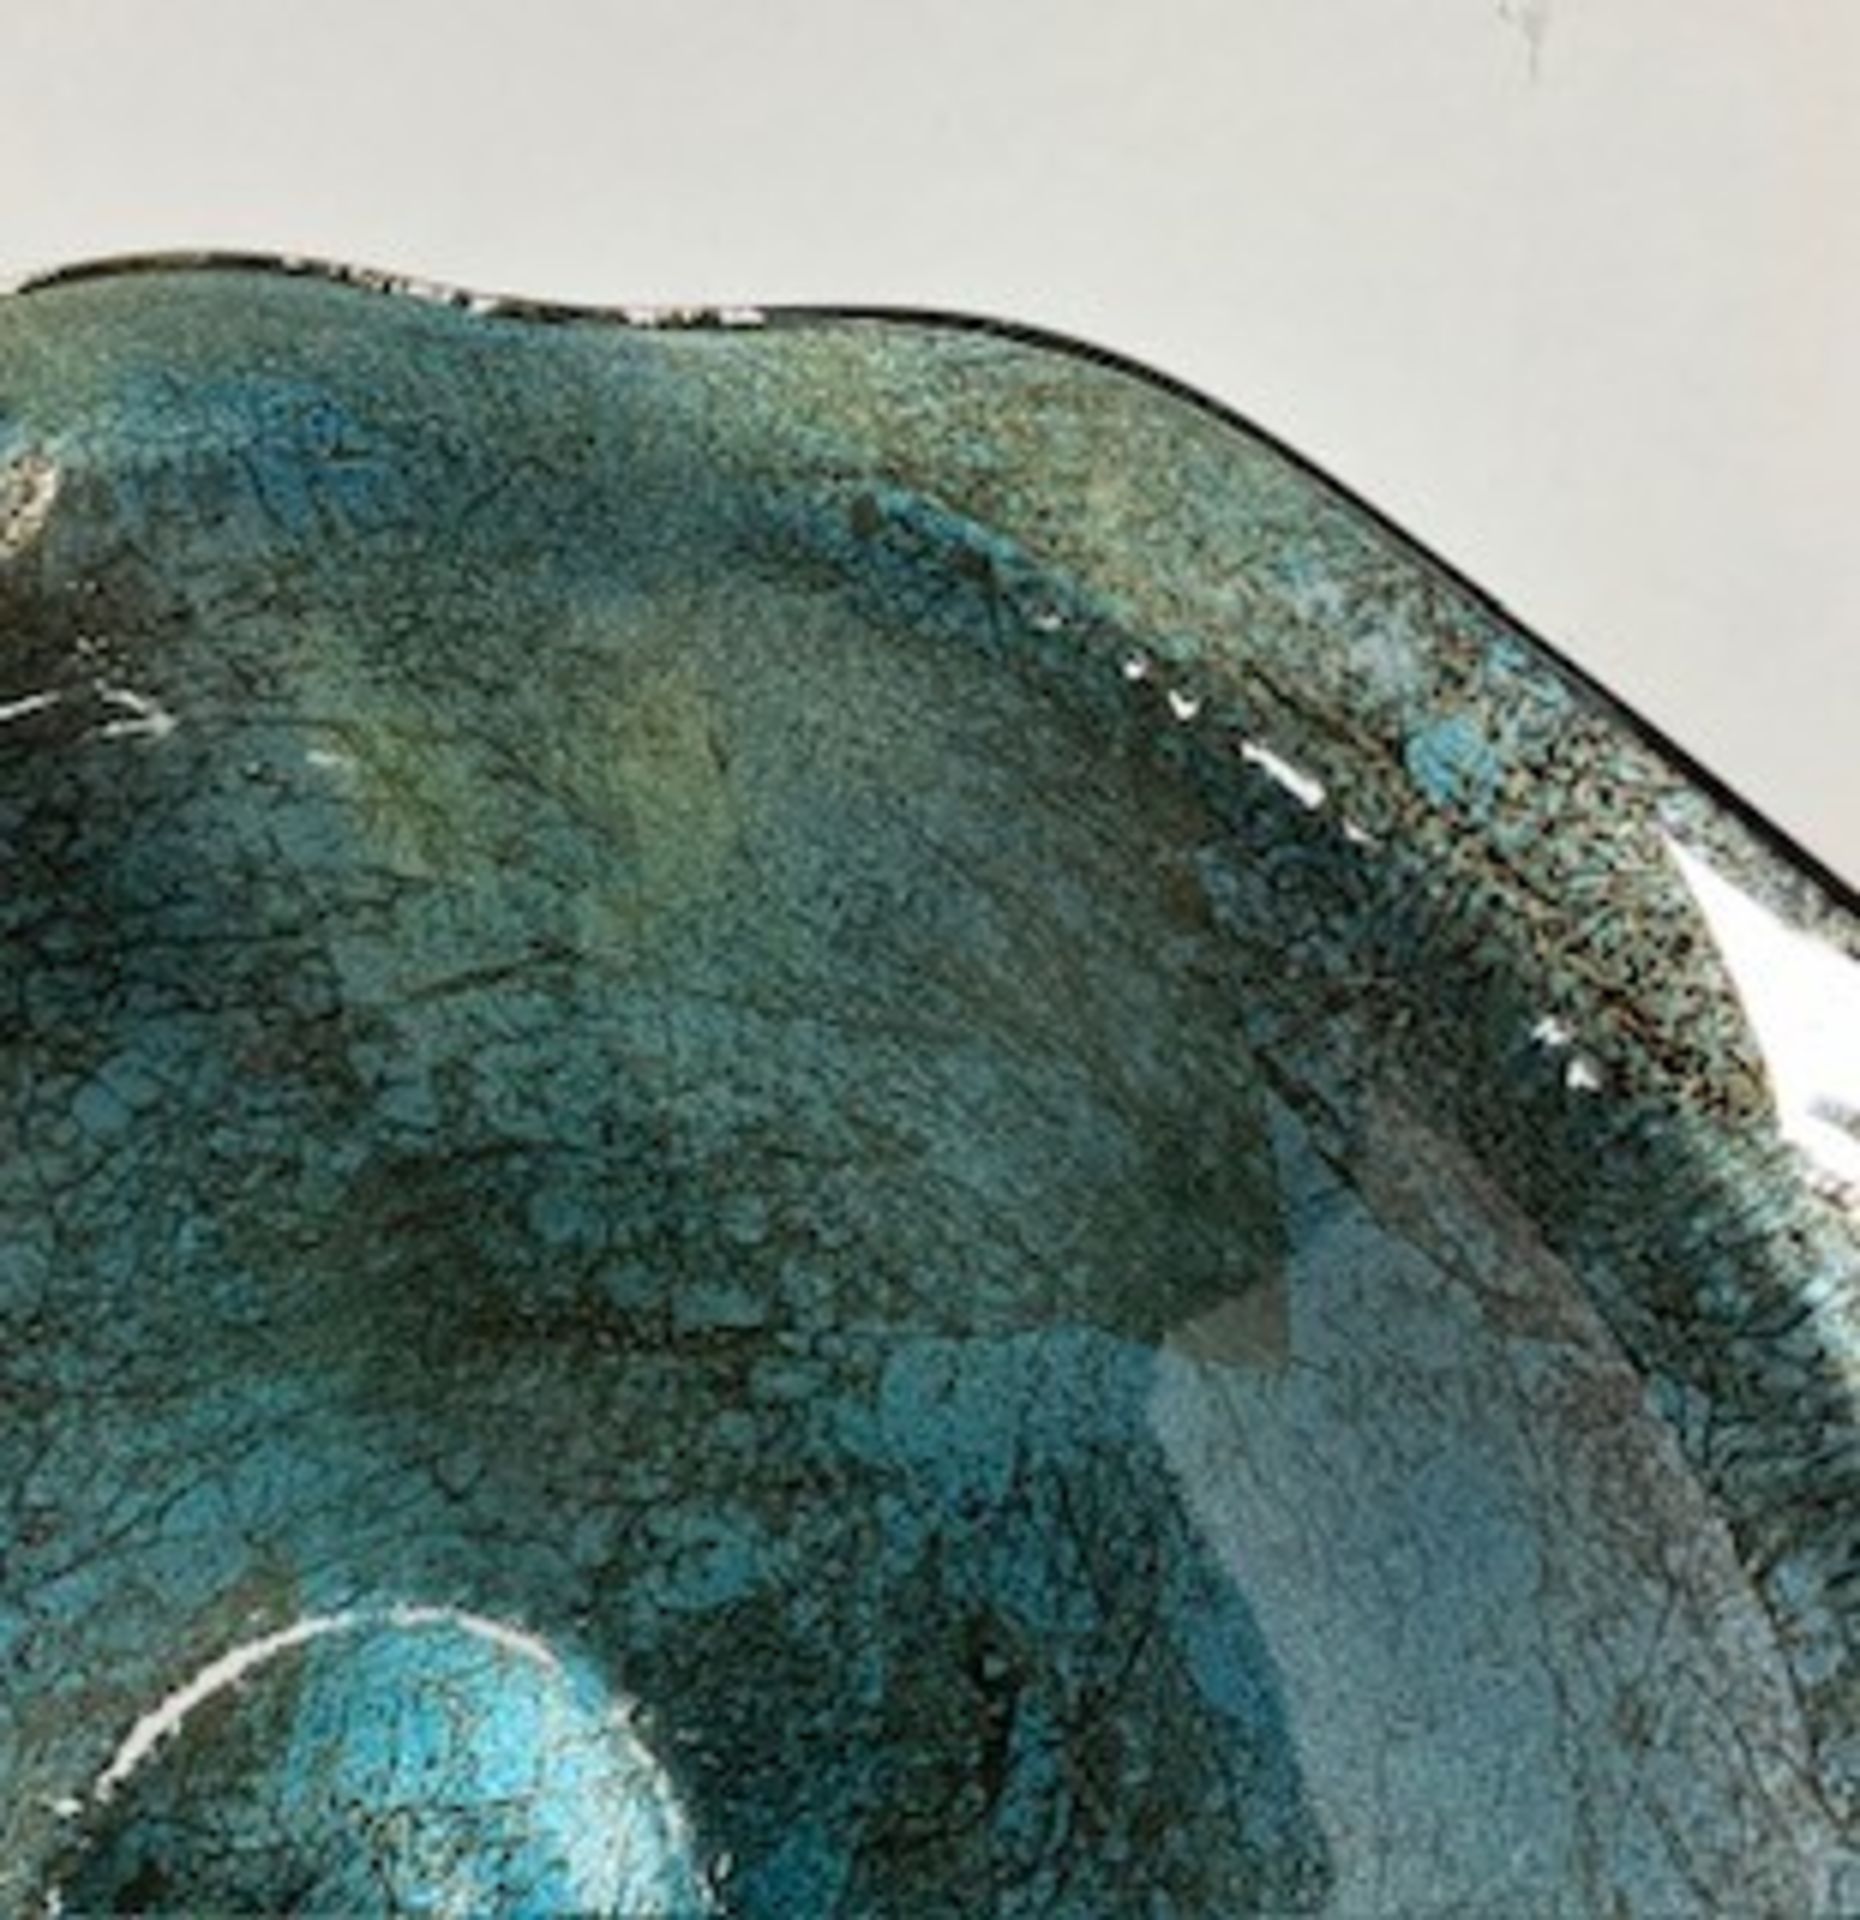 Attributed Dale Chihuly Art Glass Bowl - Image 8 of 14